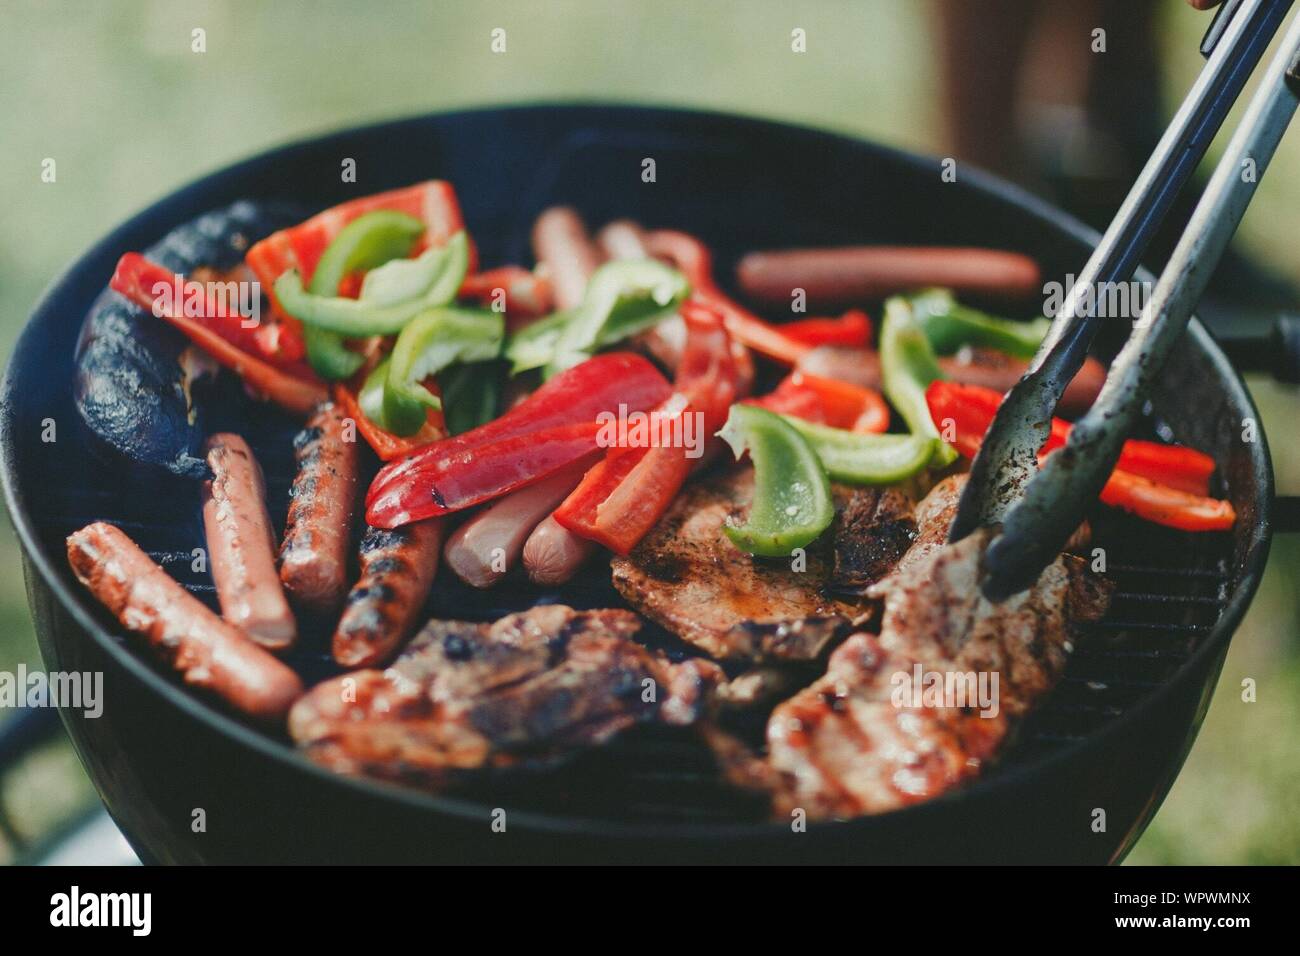 Close-up Of Food Grilling On Barbecue Stock Photo